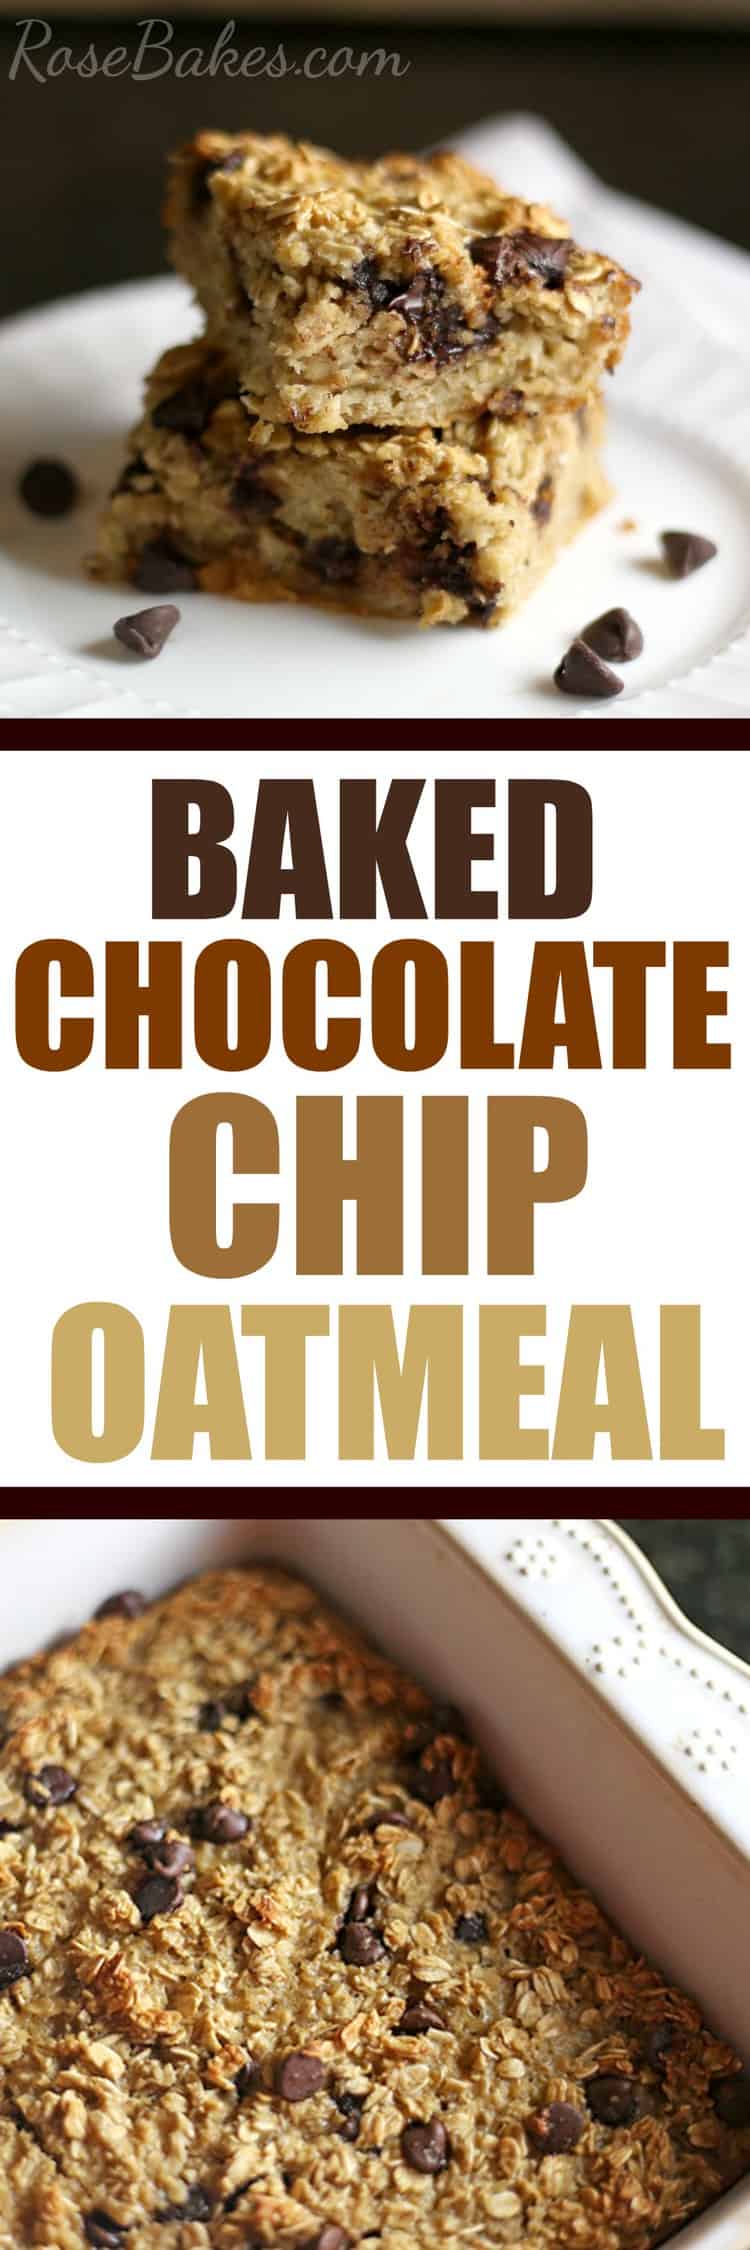 baked-chocolate-chip-oatmeal-by-rosebakes-ic-oatober-ad